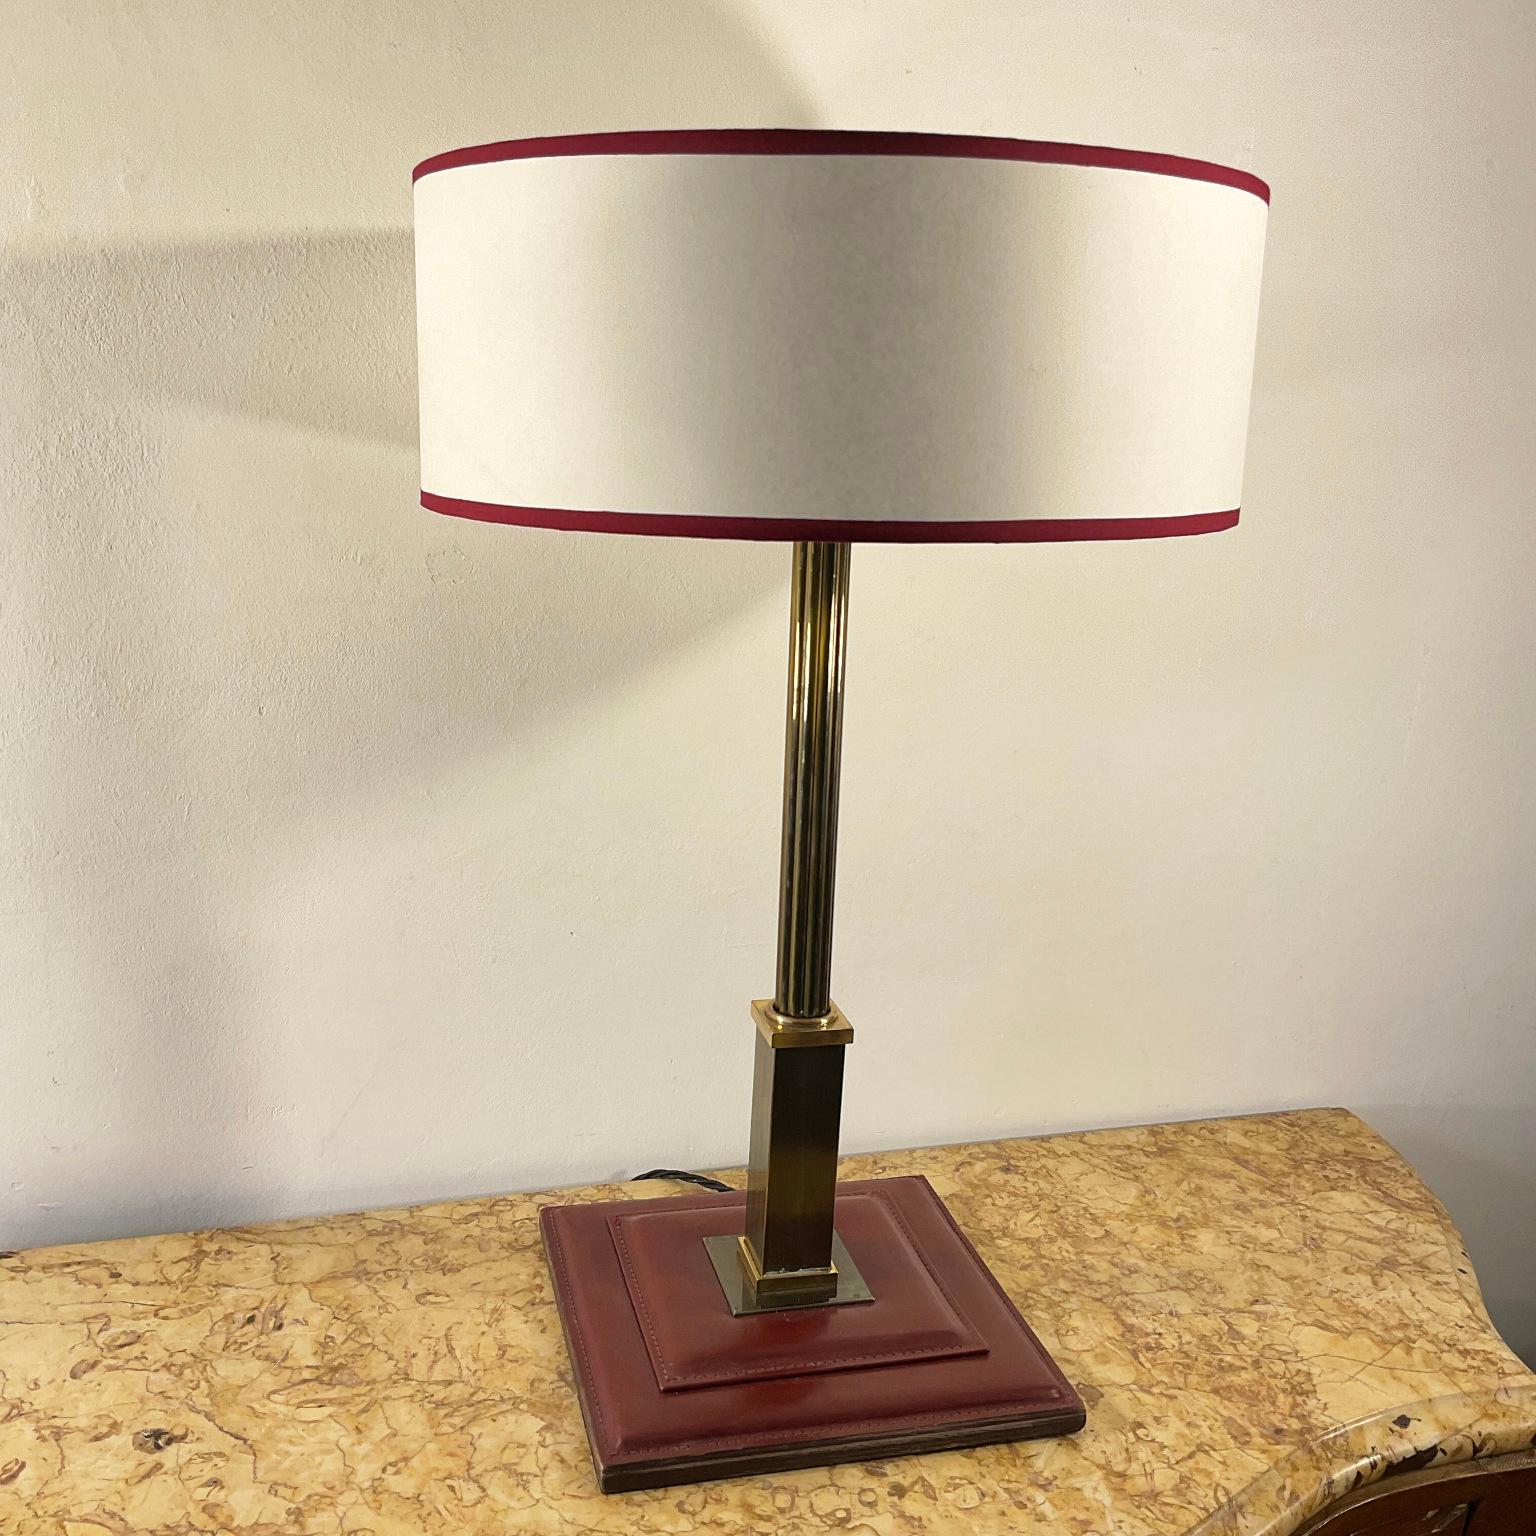 Mid-20th Century 1950s Table Lamp Attributed to Maison Longchamp France in Burgundy Leather